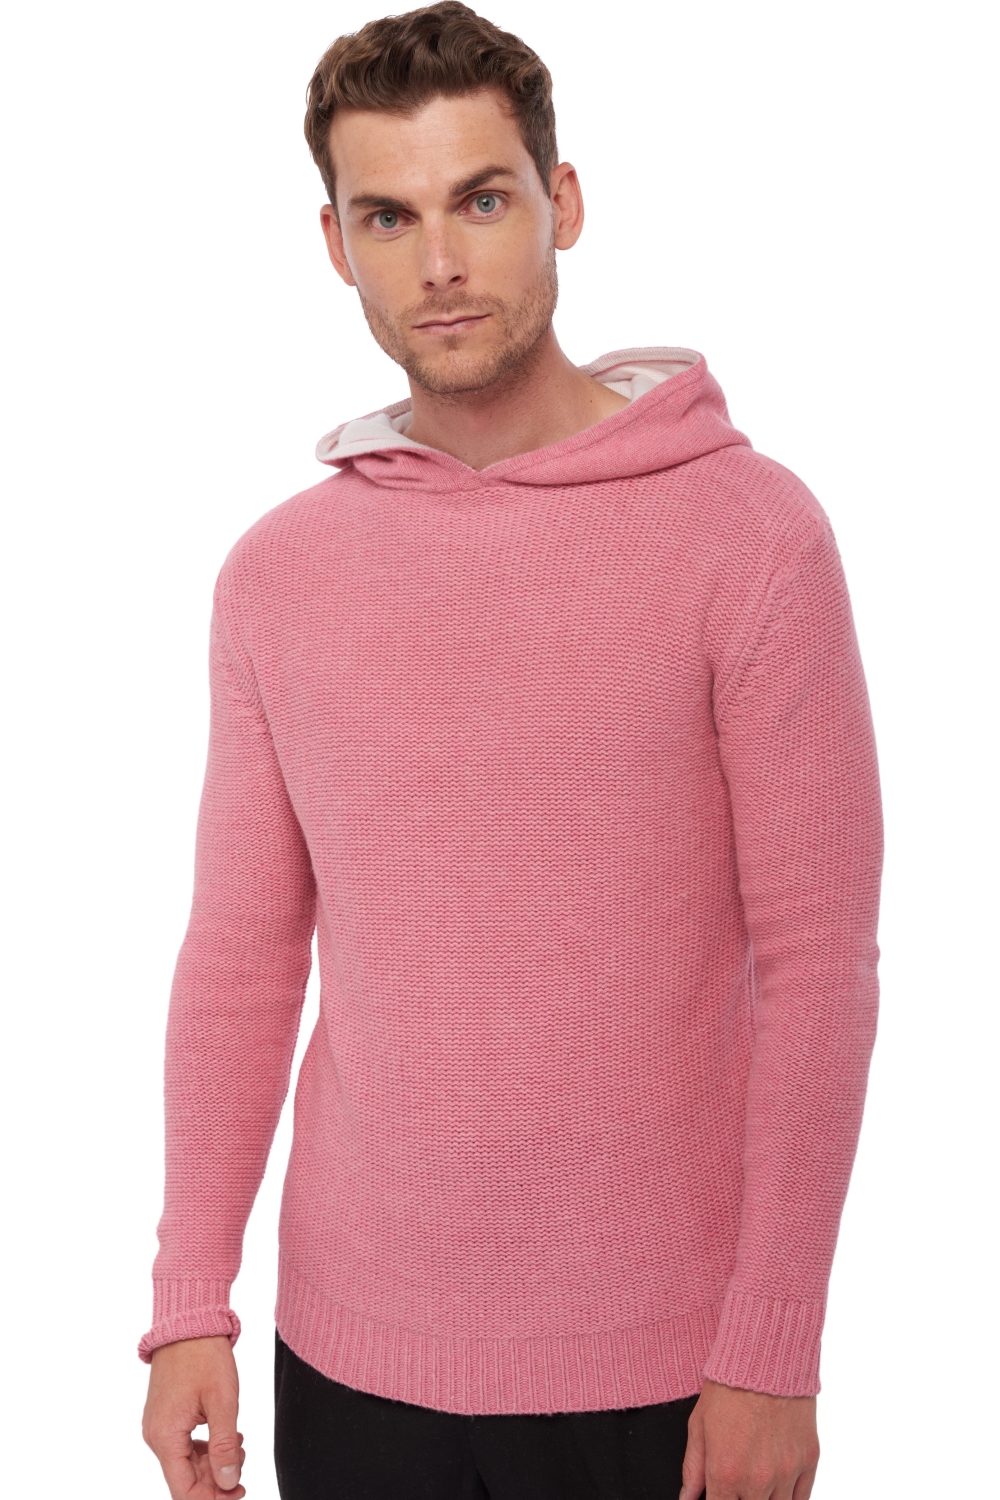 Yak pull homme epais conor pink blanc casse m